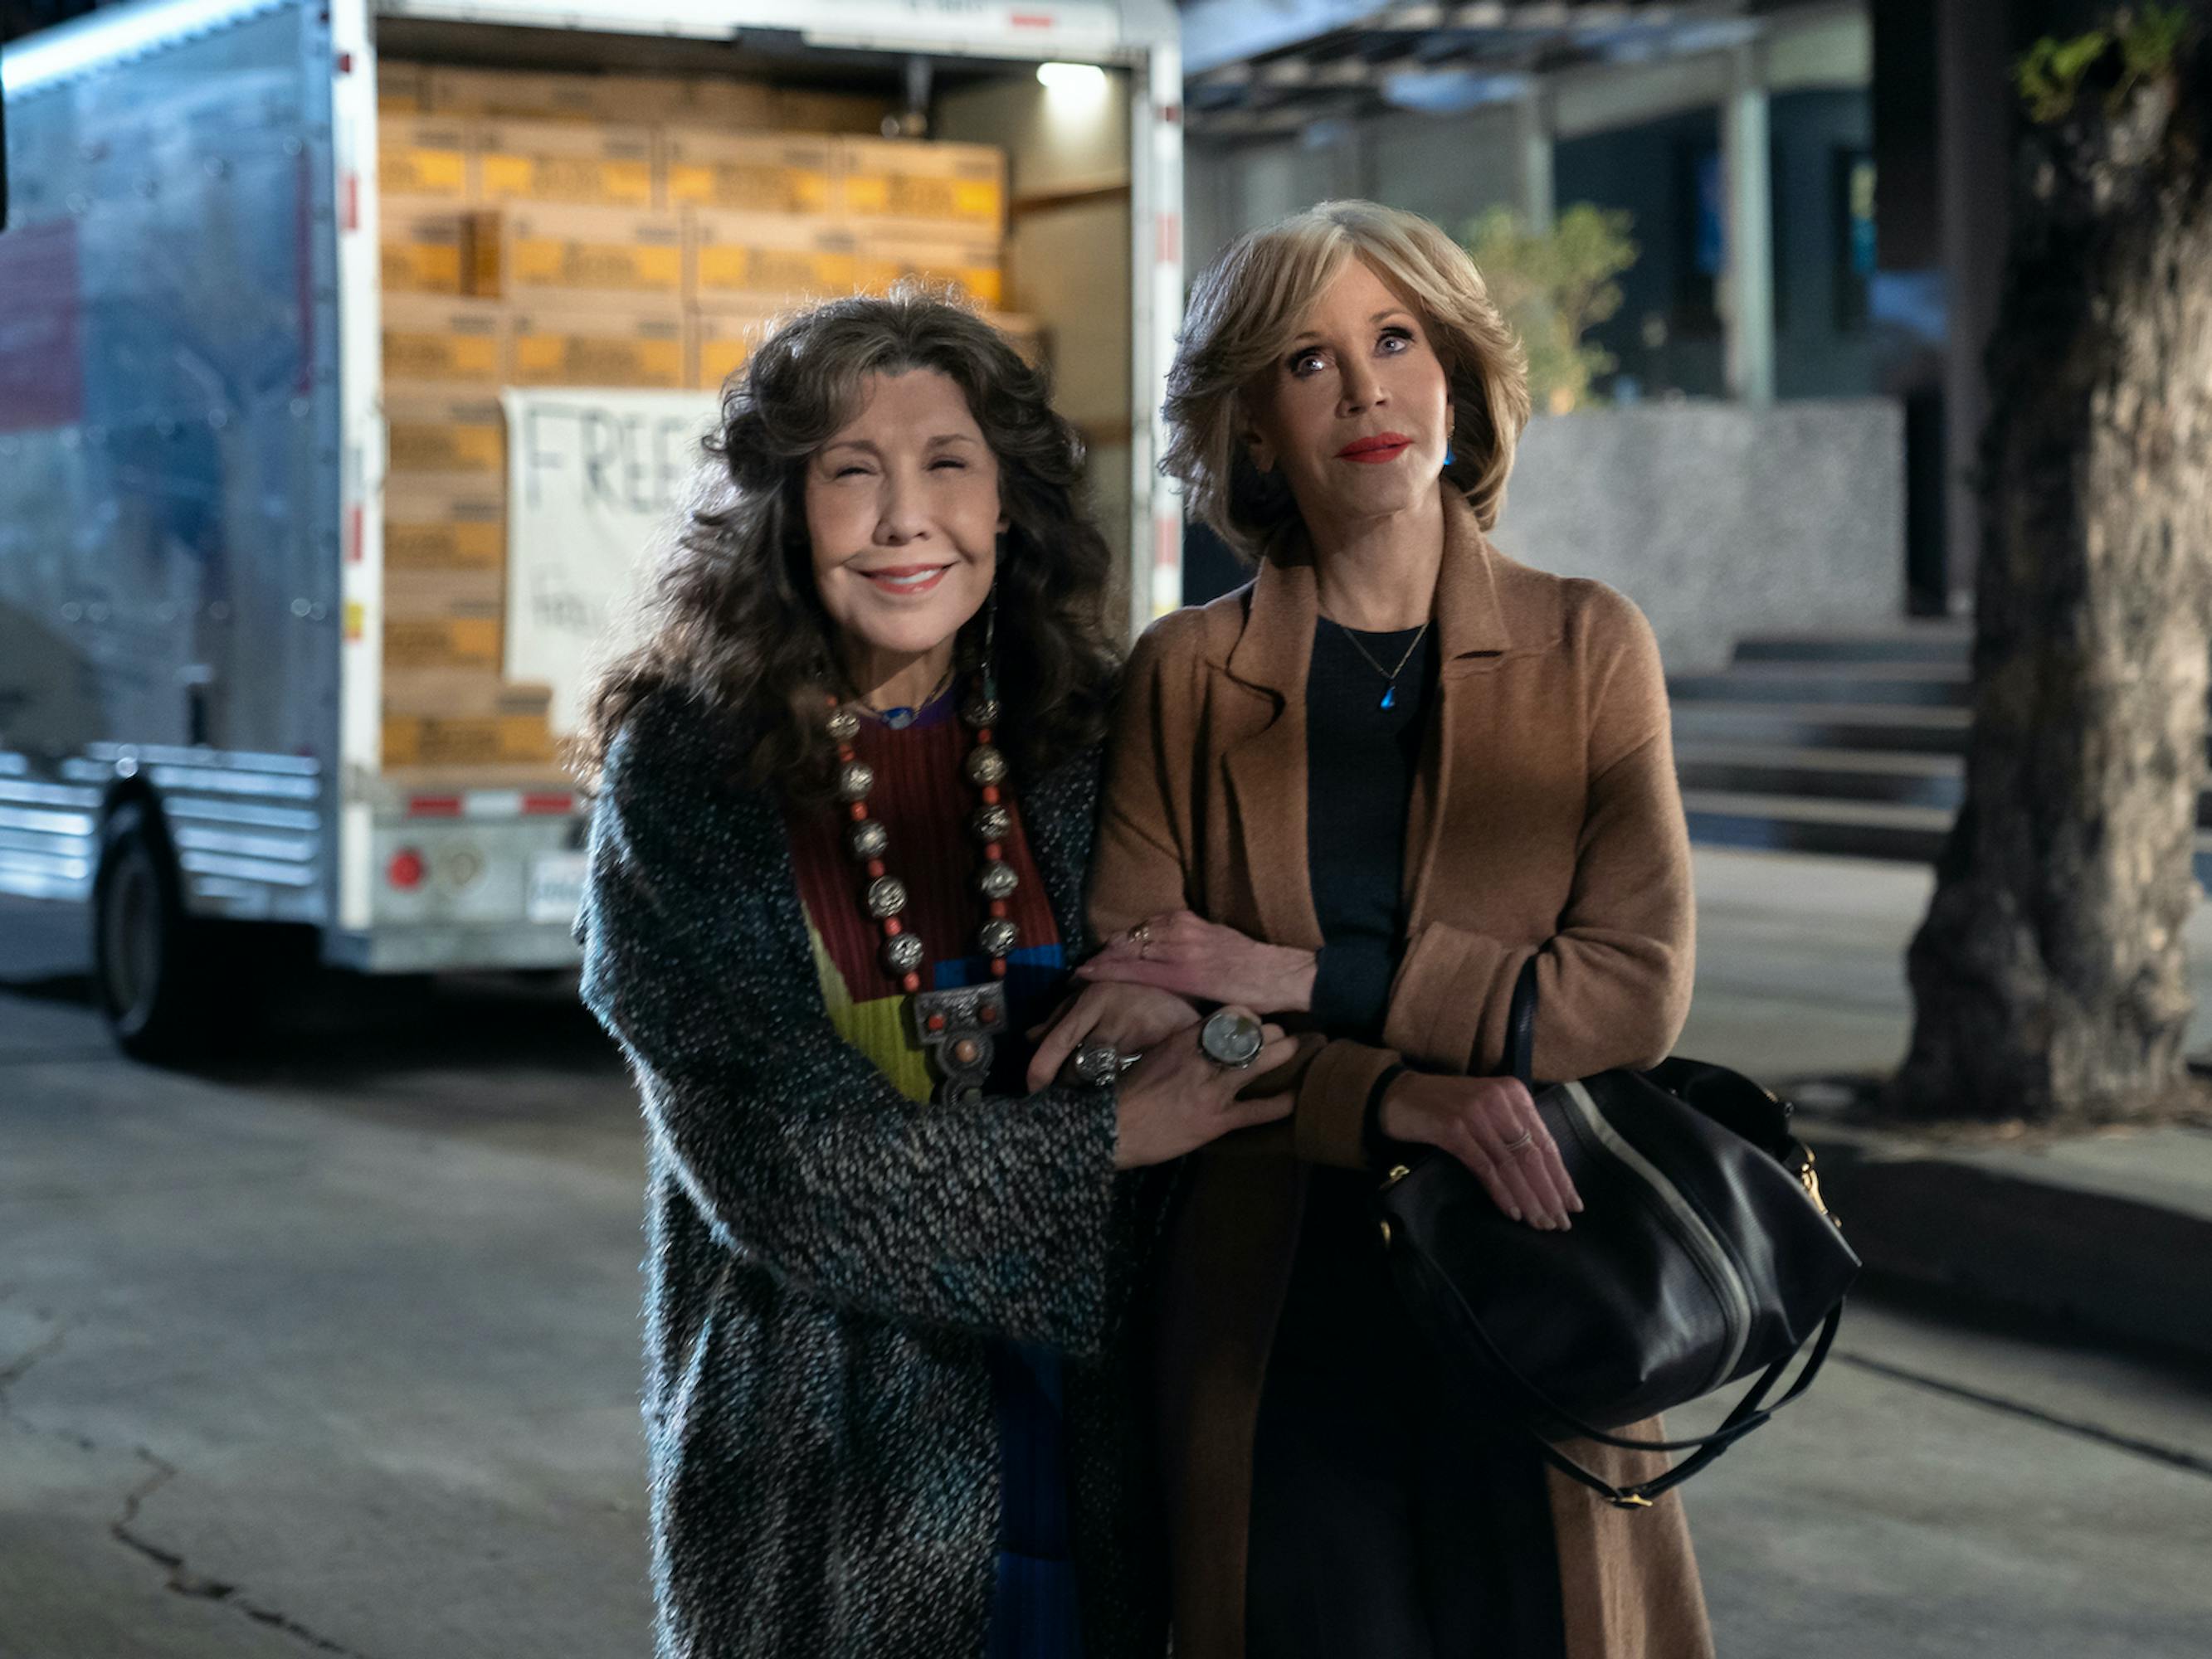 Frankie and Grace stand outside on a street. Frankie wears a shaggy grey jacket and a chunky necklace. Grace wears a red lip, camel jacket, black dress, and black bag. Behind them is a truck with boxes of something labeled 'Free.' 